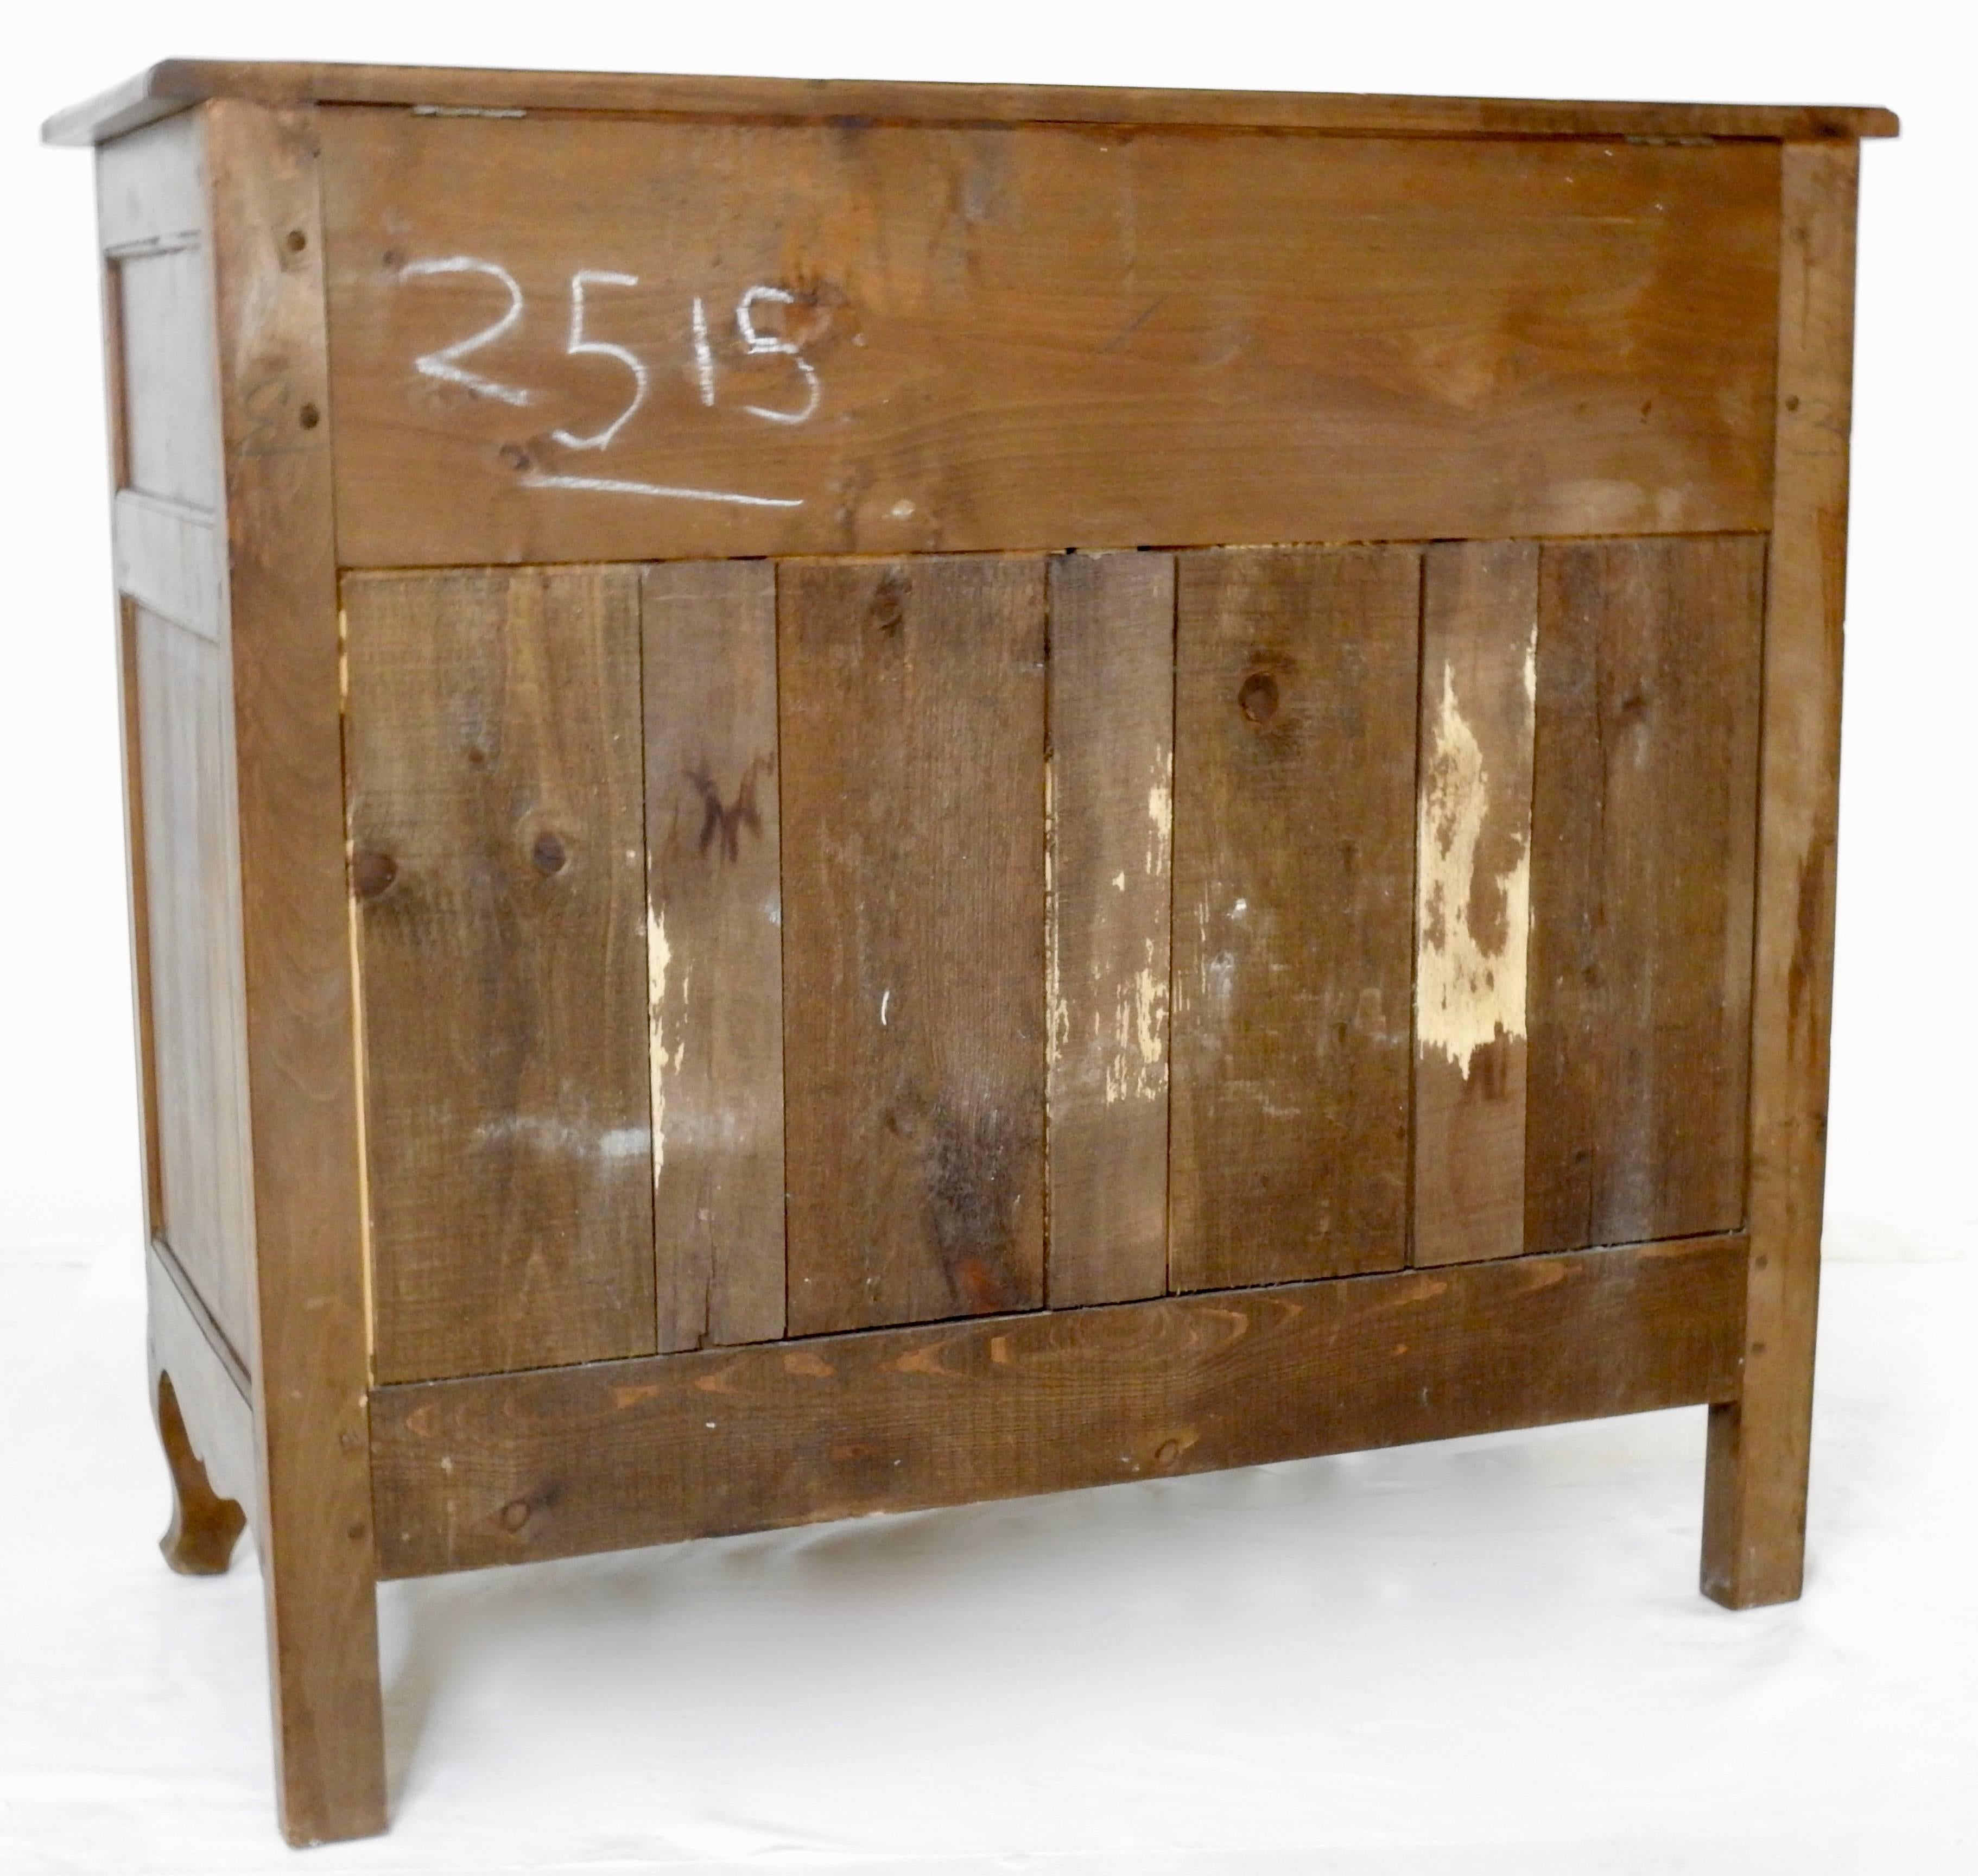 Unique hinges accent this Country French lift-top sideboard. Graceful cabriole legs add to the details. It features a lift-top with doors on the front. Made of walnut in the mid-20th century from the regions of France.